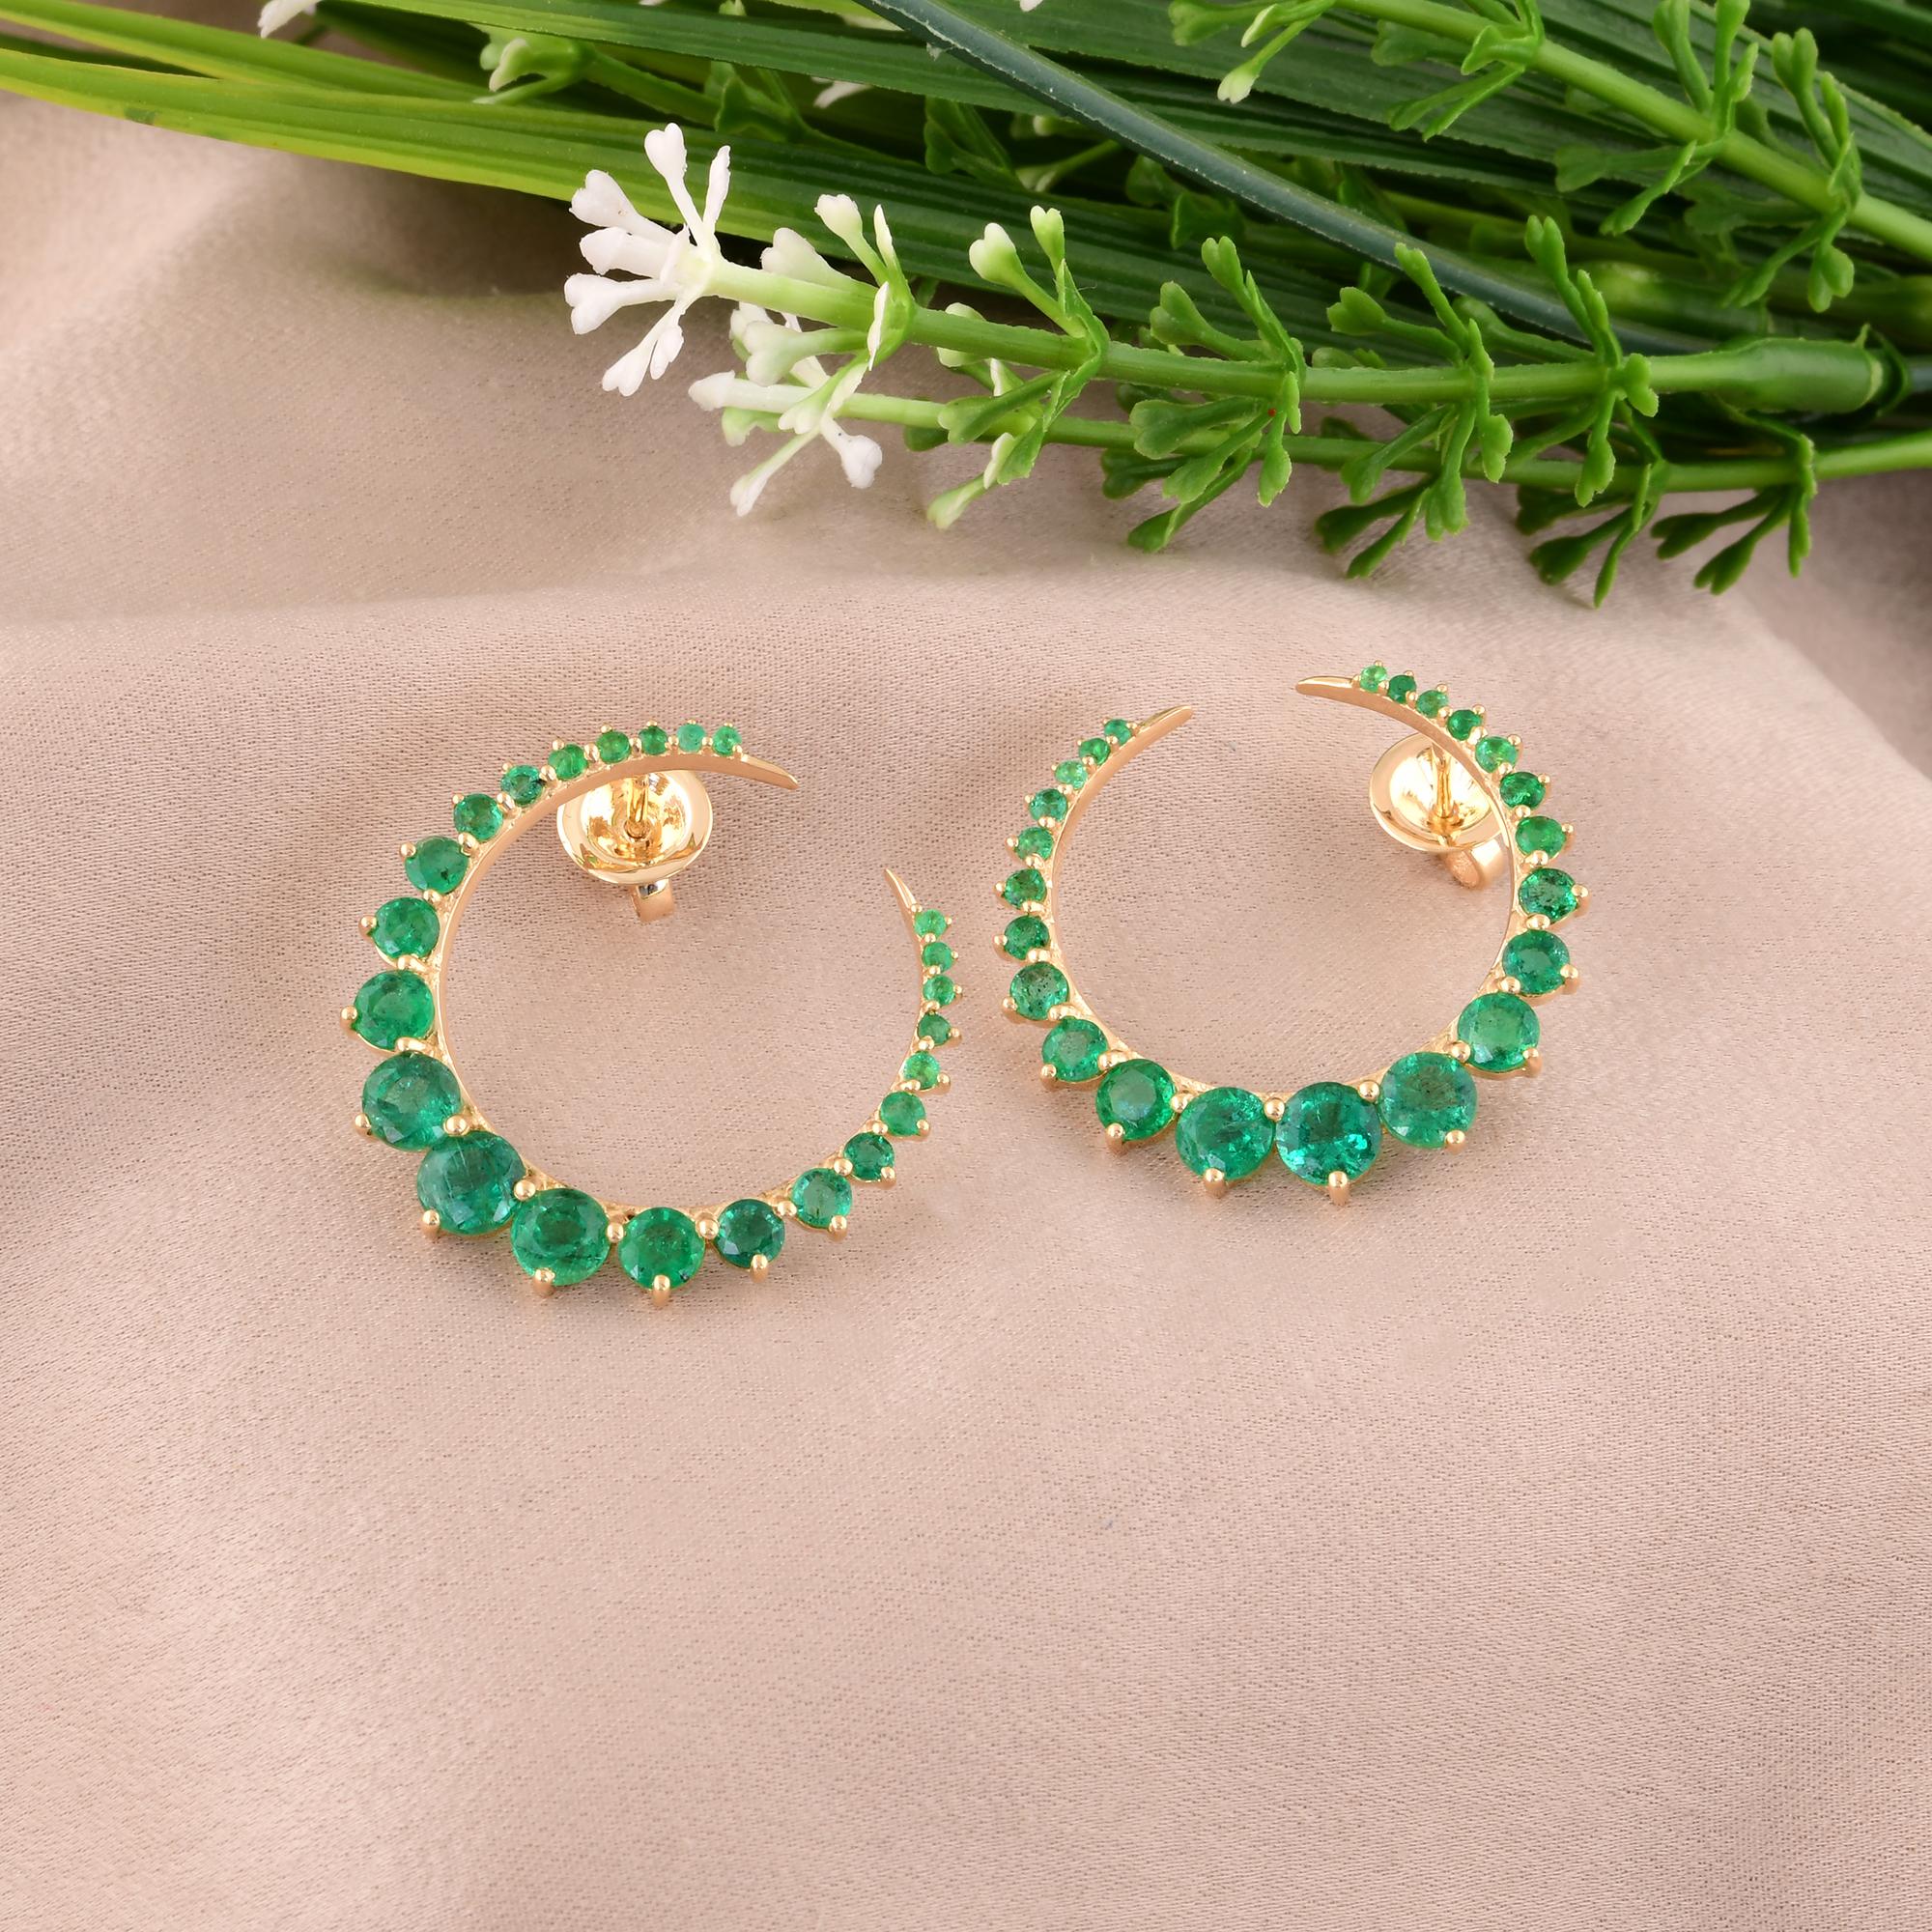 Round Cut Real Zambian Emerald Gemstone Crescent Moon Earrings 14 Karat Solid Yellow Gold For Sale